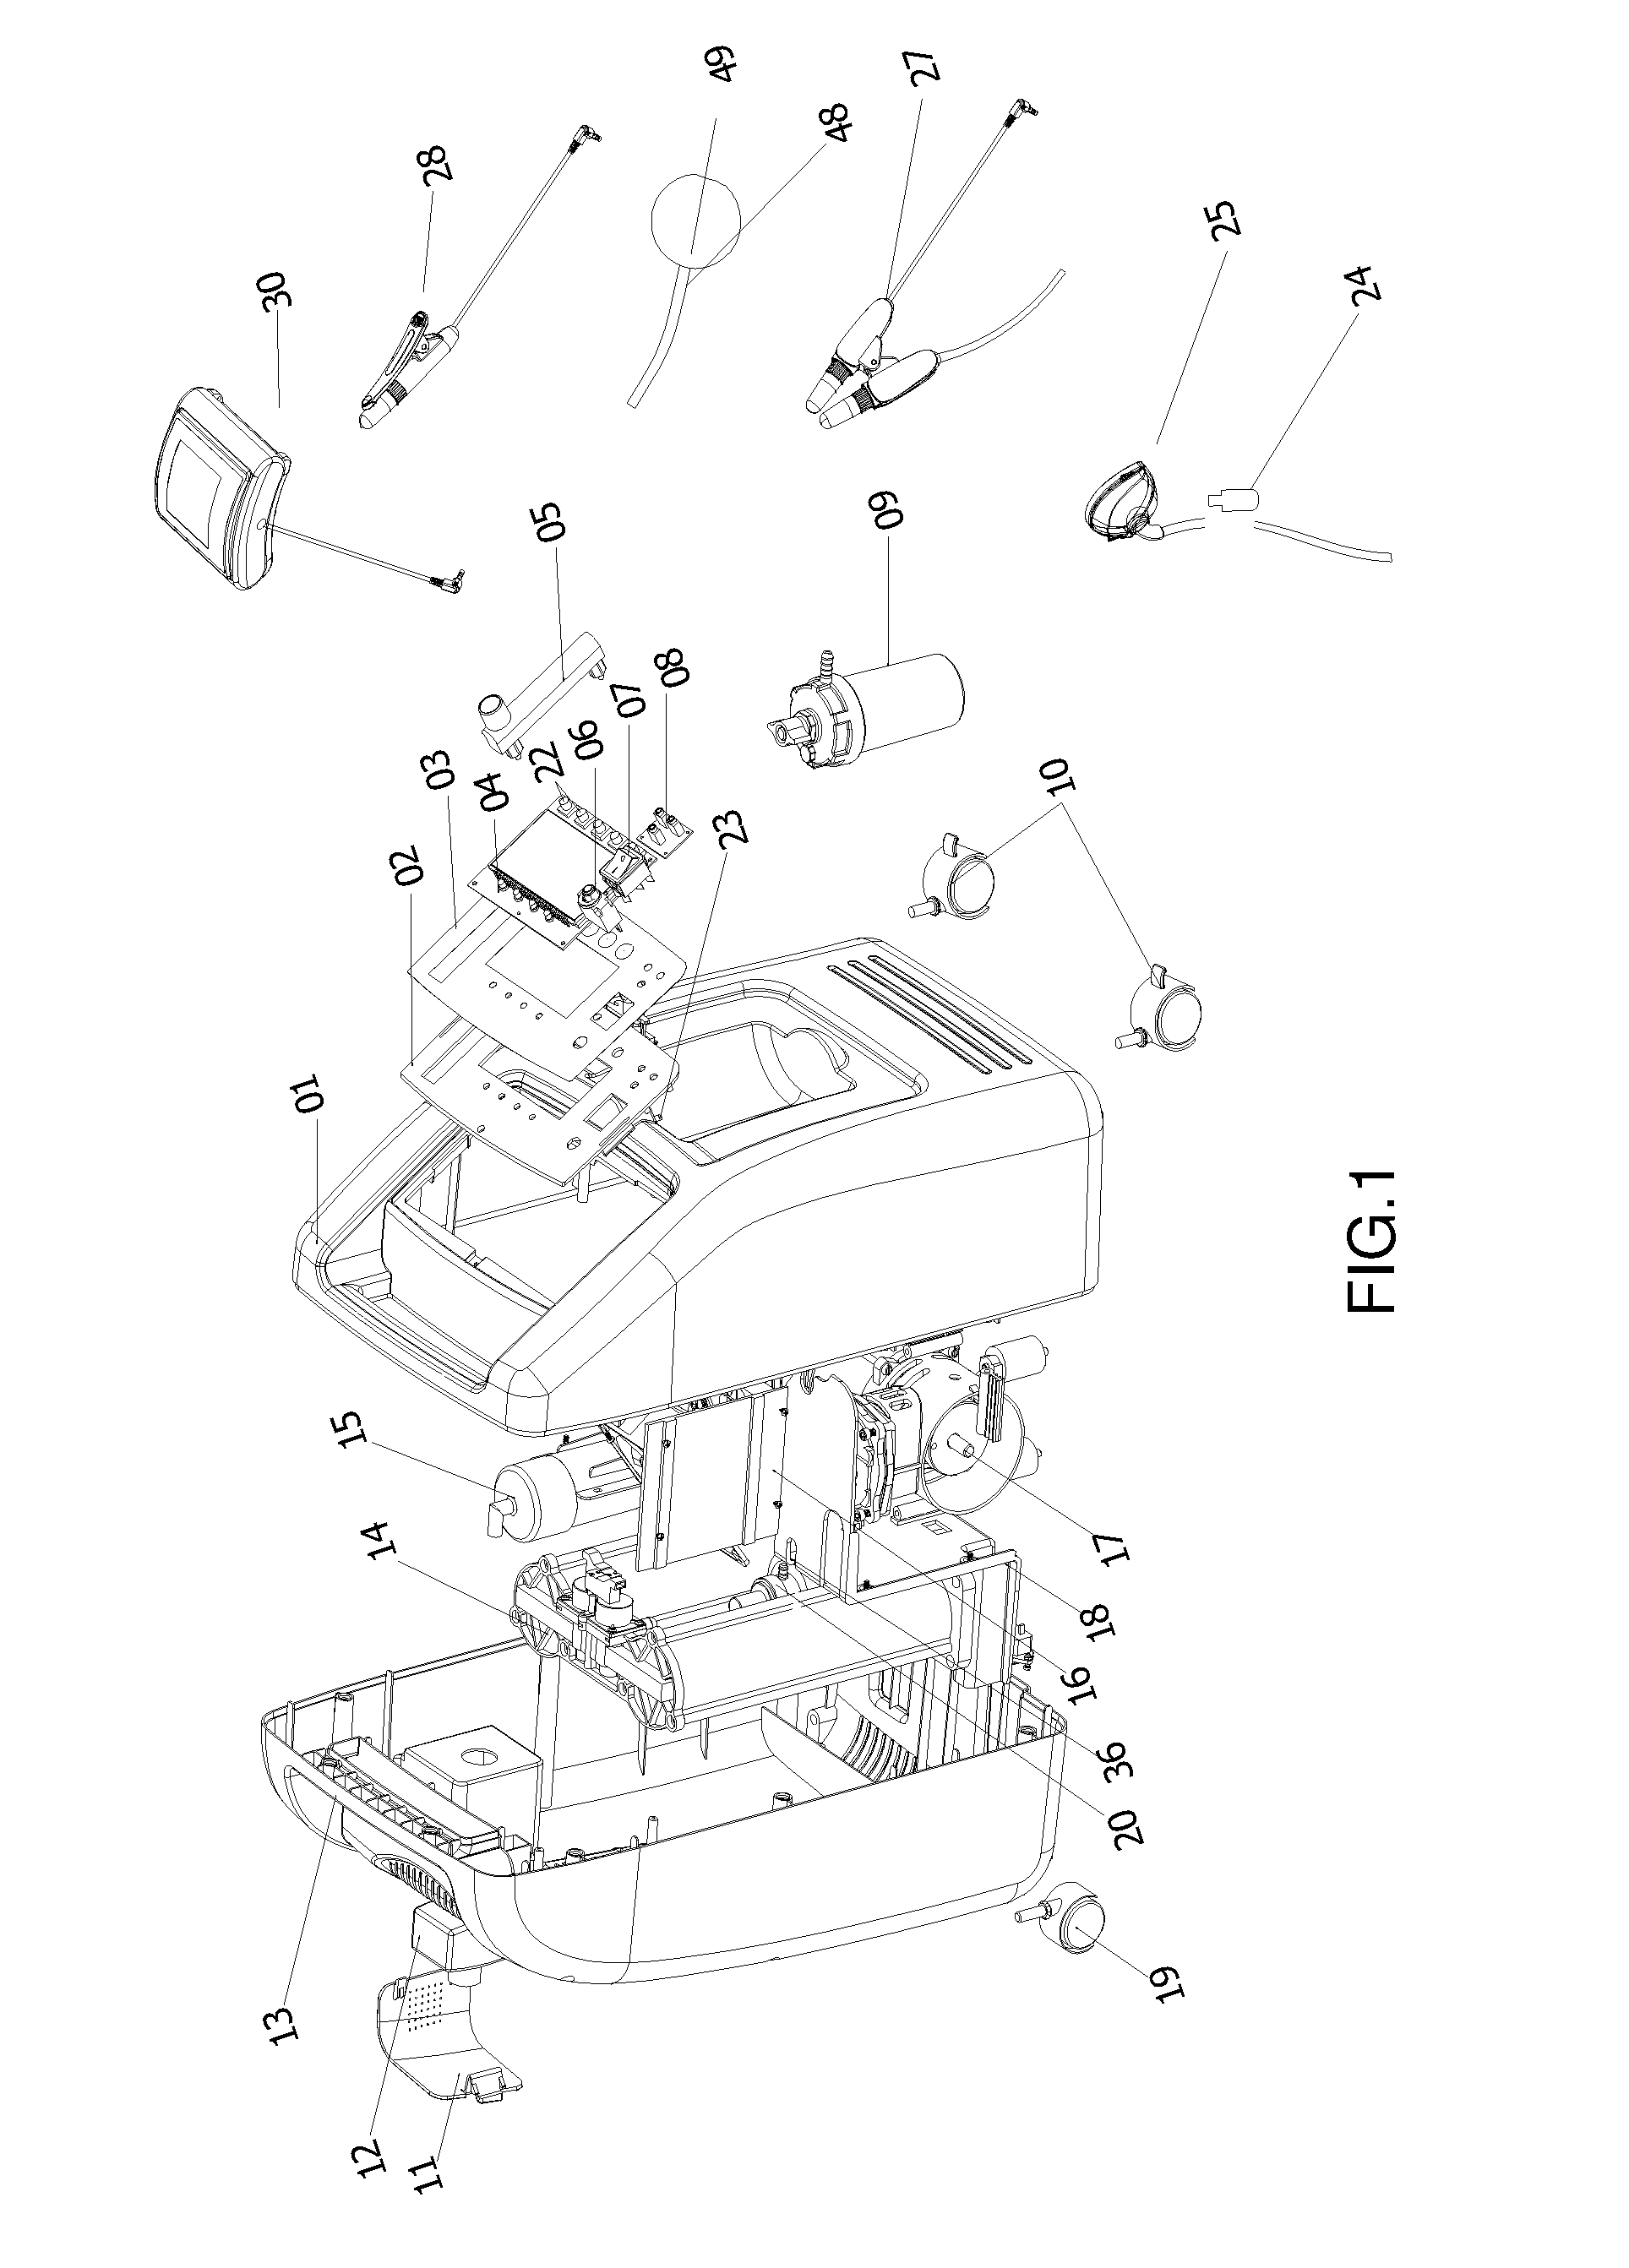 Semiconductor laser blood oxygen therapeutic apparatus